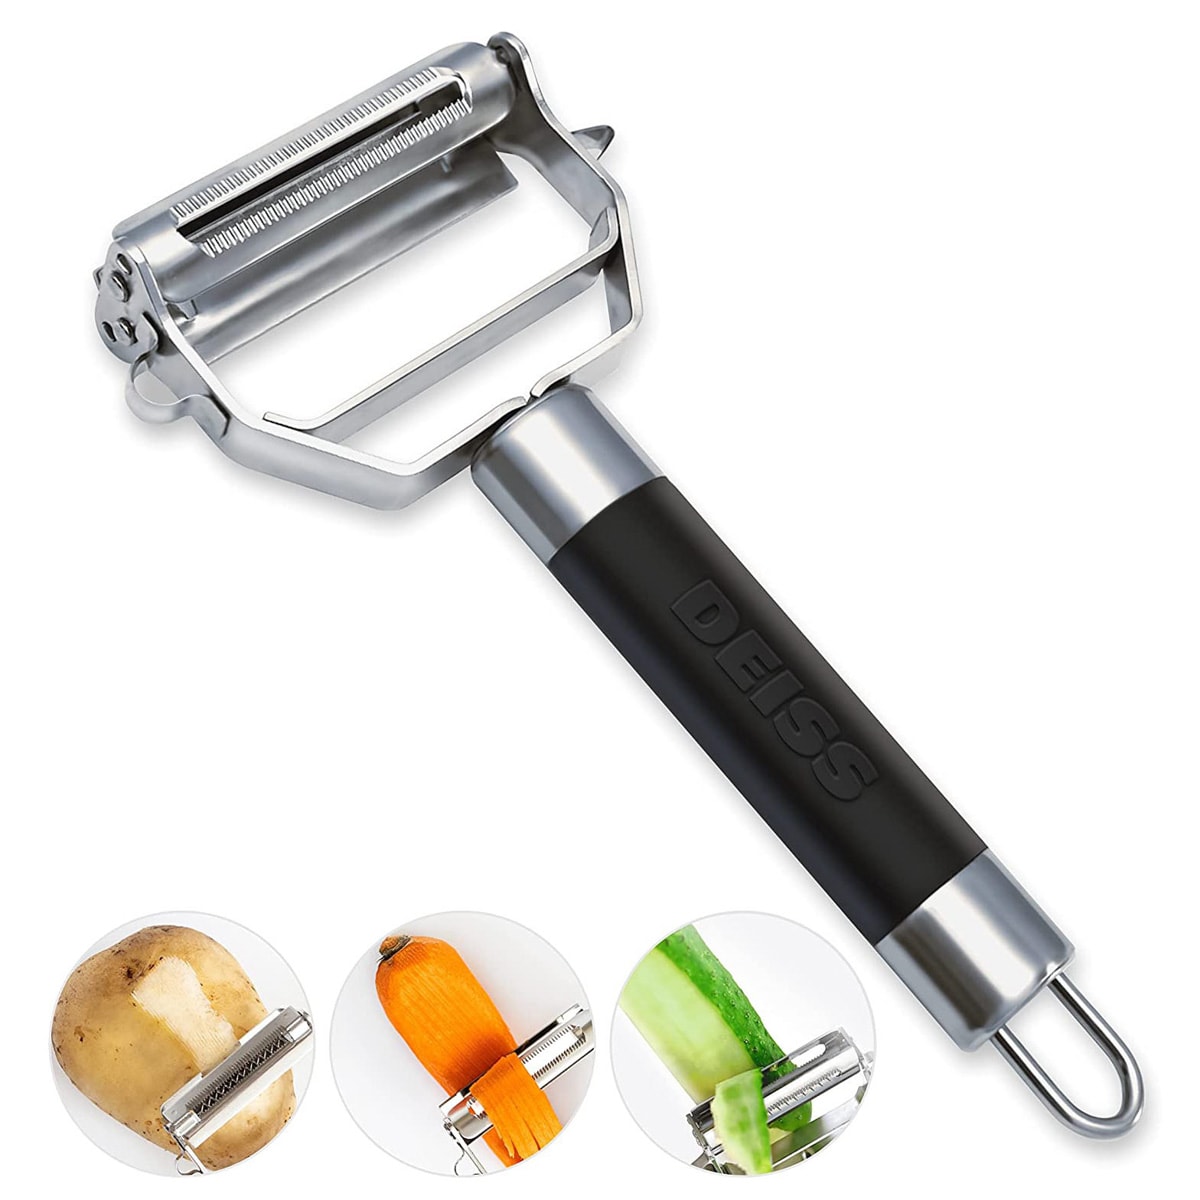 Dual julienne peeler and vegetable peeler with demonstration pictures.